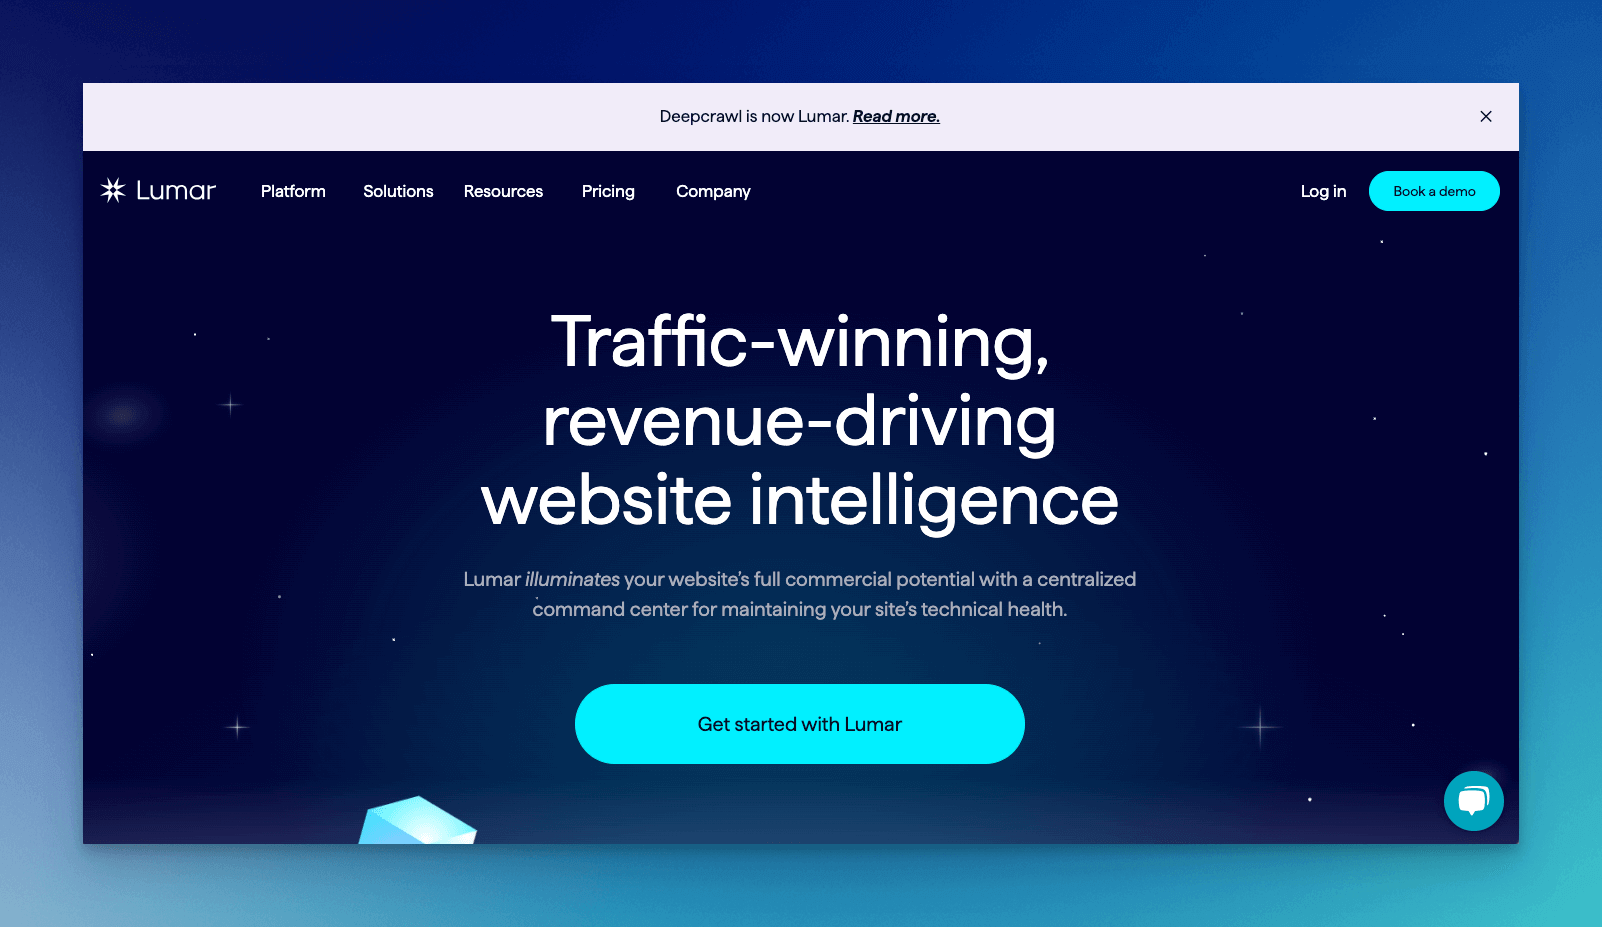 Lumar formerly known as DeepCrawl seo crawler tool homepage with a dark blue background and a copy that says "Traffic winning, revenue driving, website inteligence"